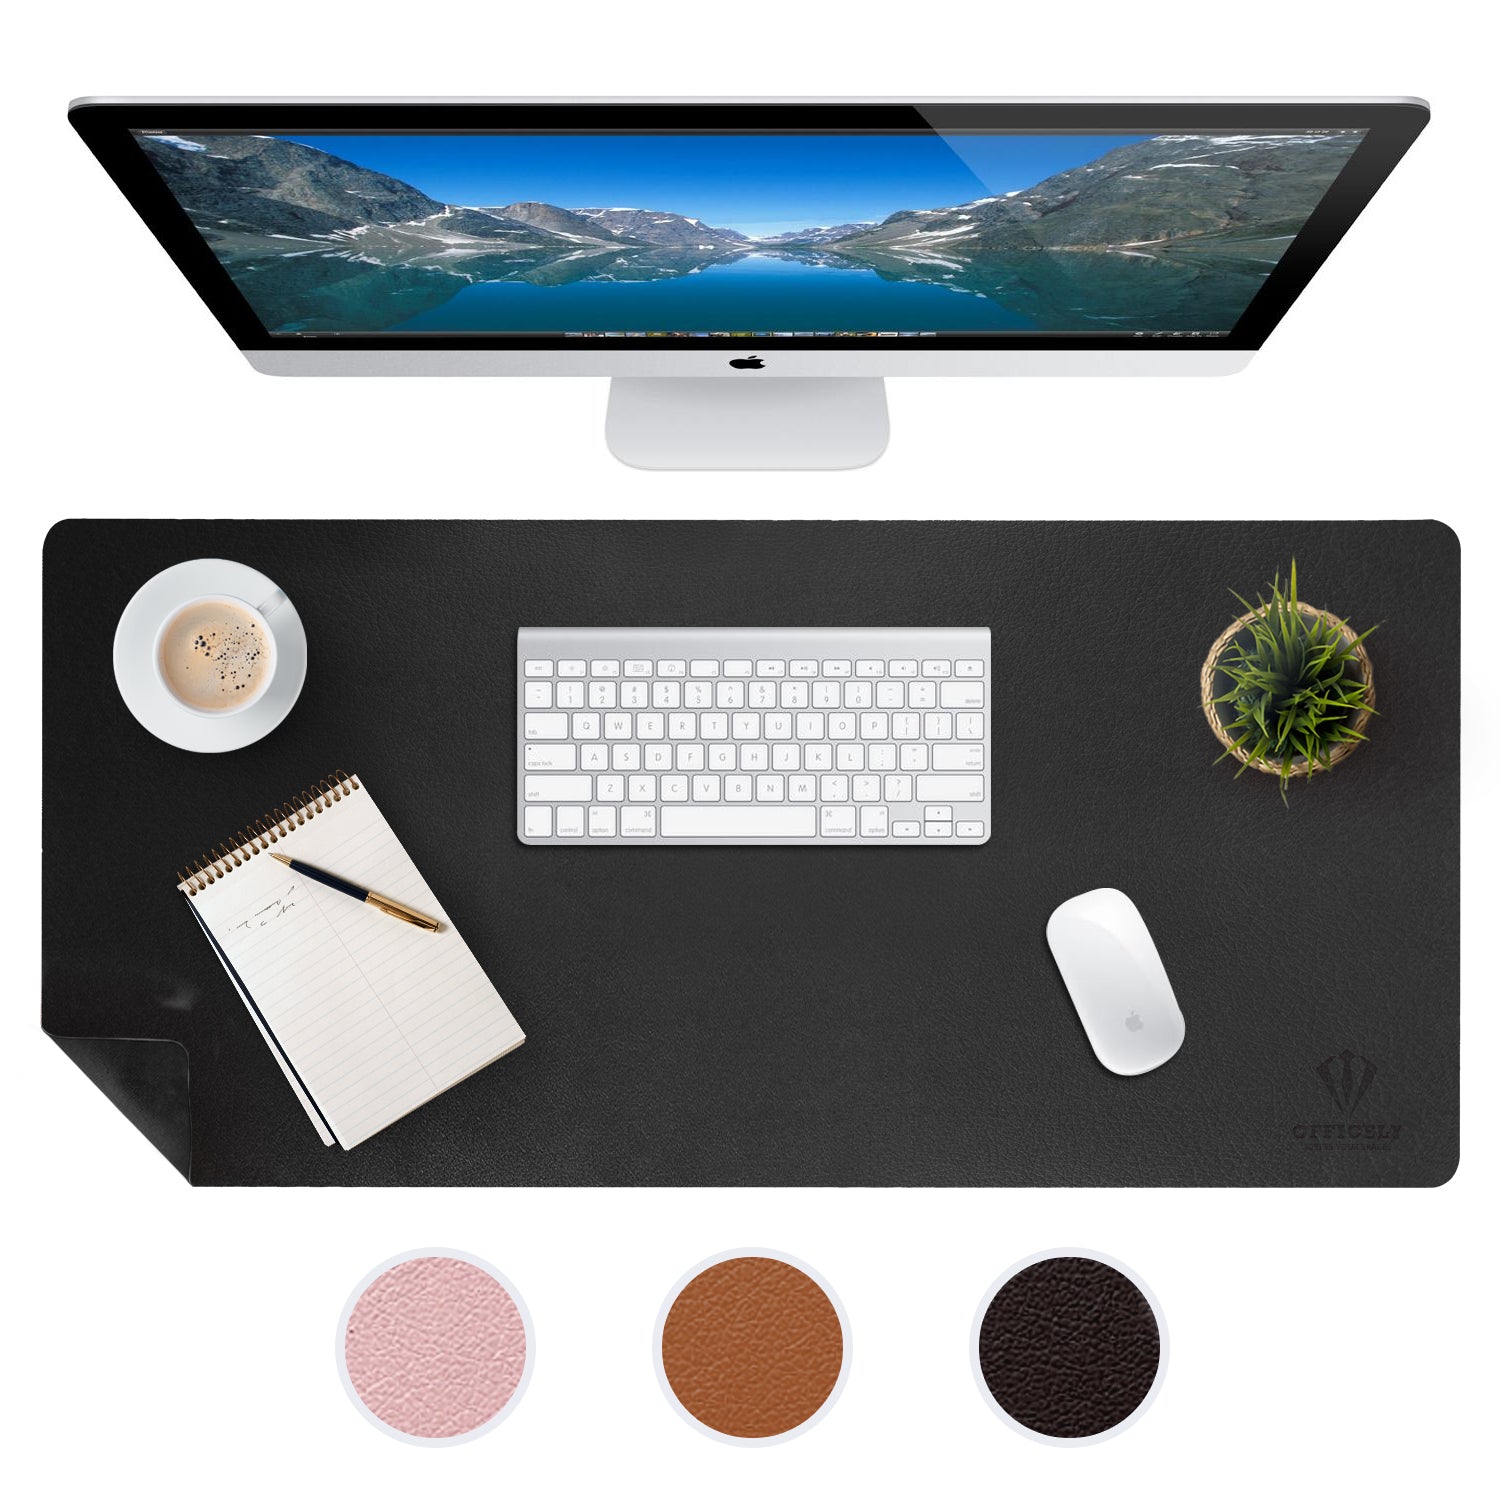 Venito Premium Leather Desk Mat (36 x 19 inch) - Large Mouse Mat for Home Office Accessories (Rustic Black)